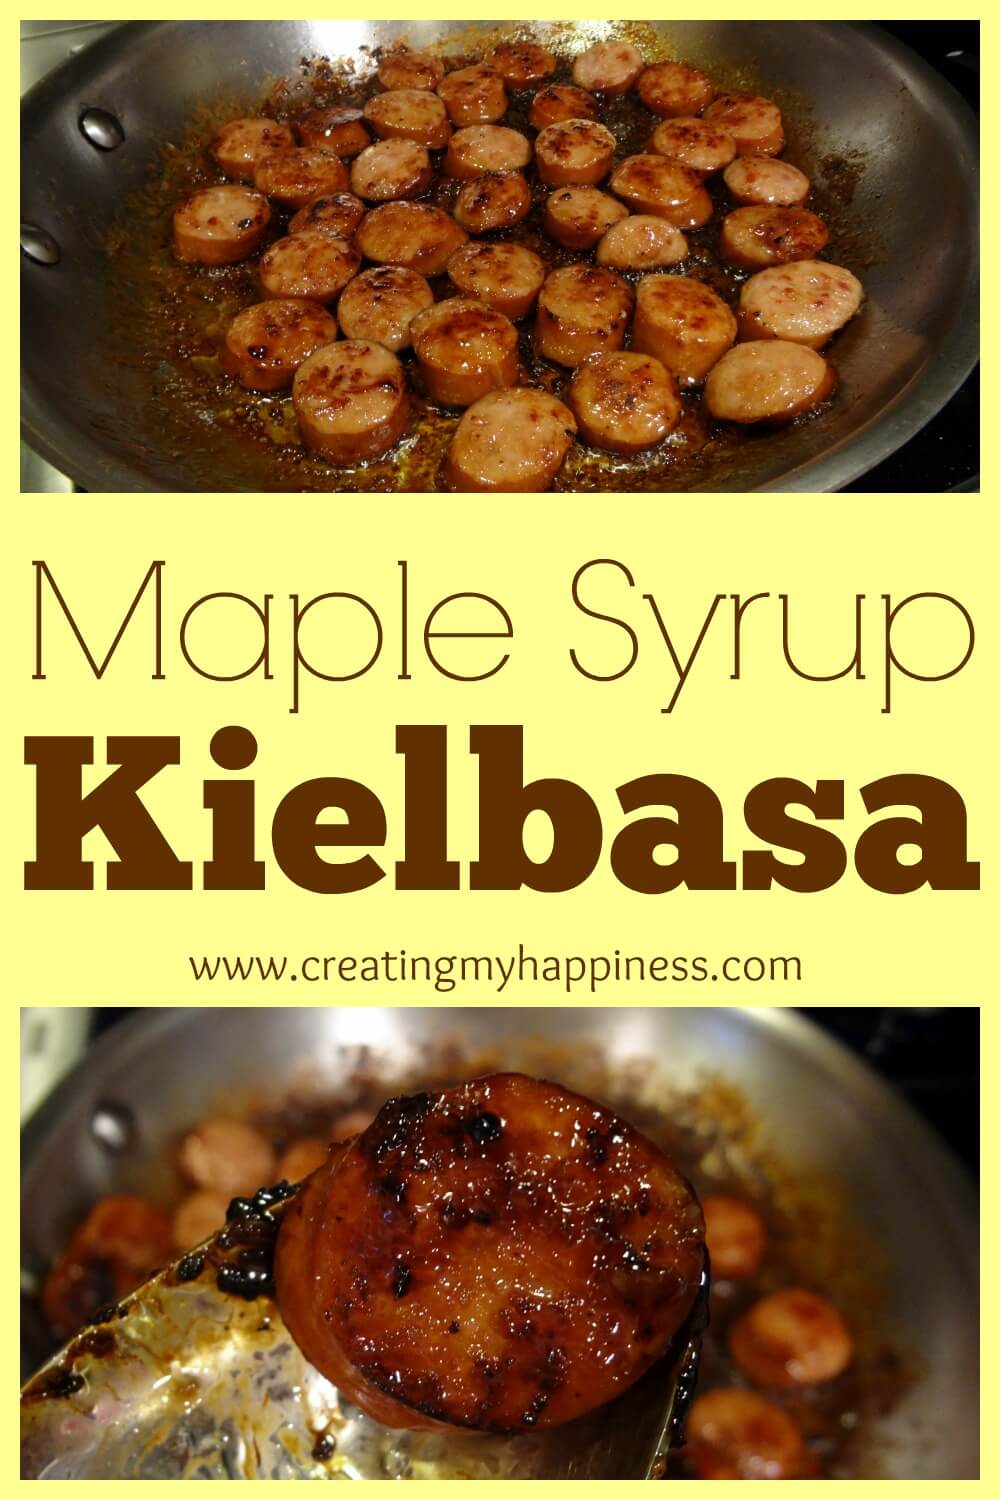 This amazingly simple recipe will have your whole family asking for more. Just 2 ingredients, kielbasa and maple syrup, and you have a fantastic dinner!